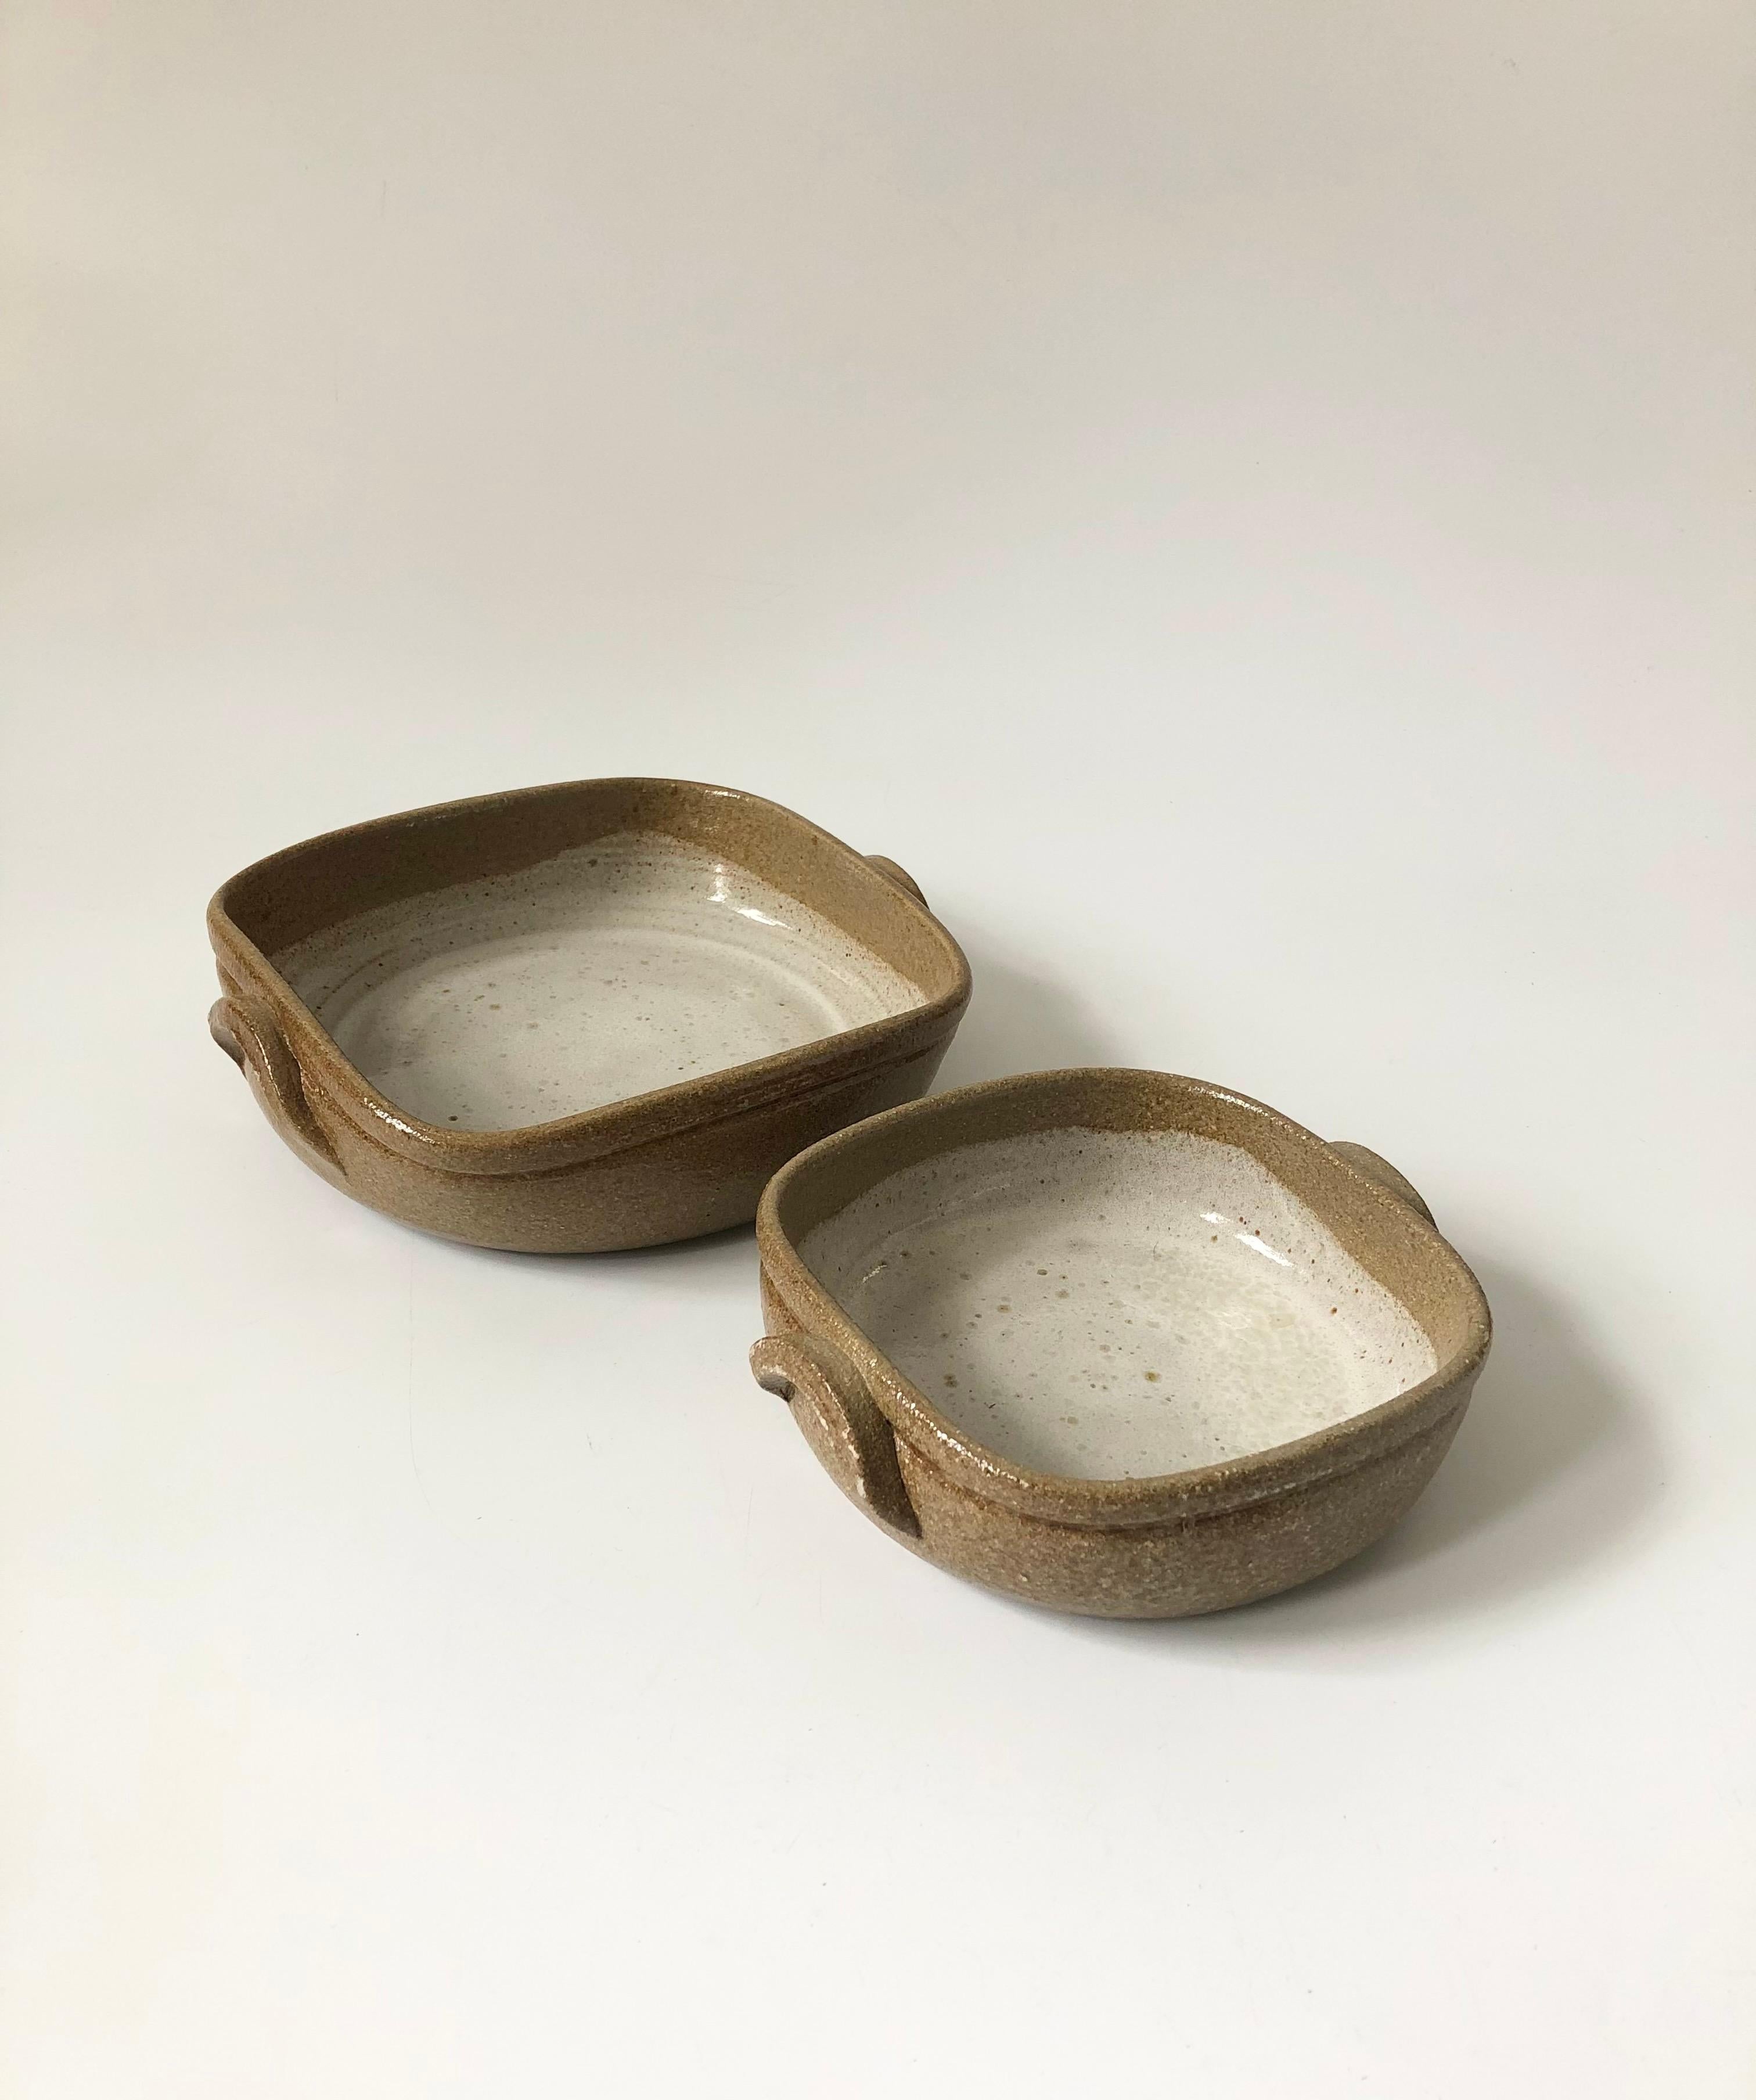 A pair of vintage Studio Pottery serving trays. Beautiful speckled earthy glazes and rounded square shapes, each with handles formed on the sides. Nest neatly into each other for storage. Made in Portugal.
The larger tray measures 7.25